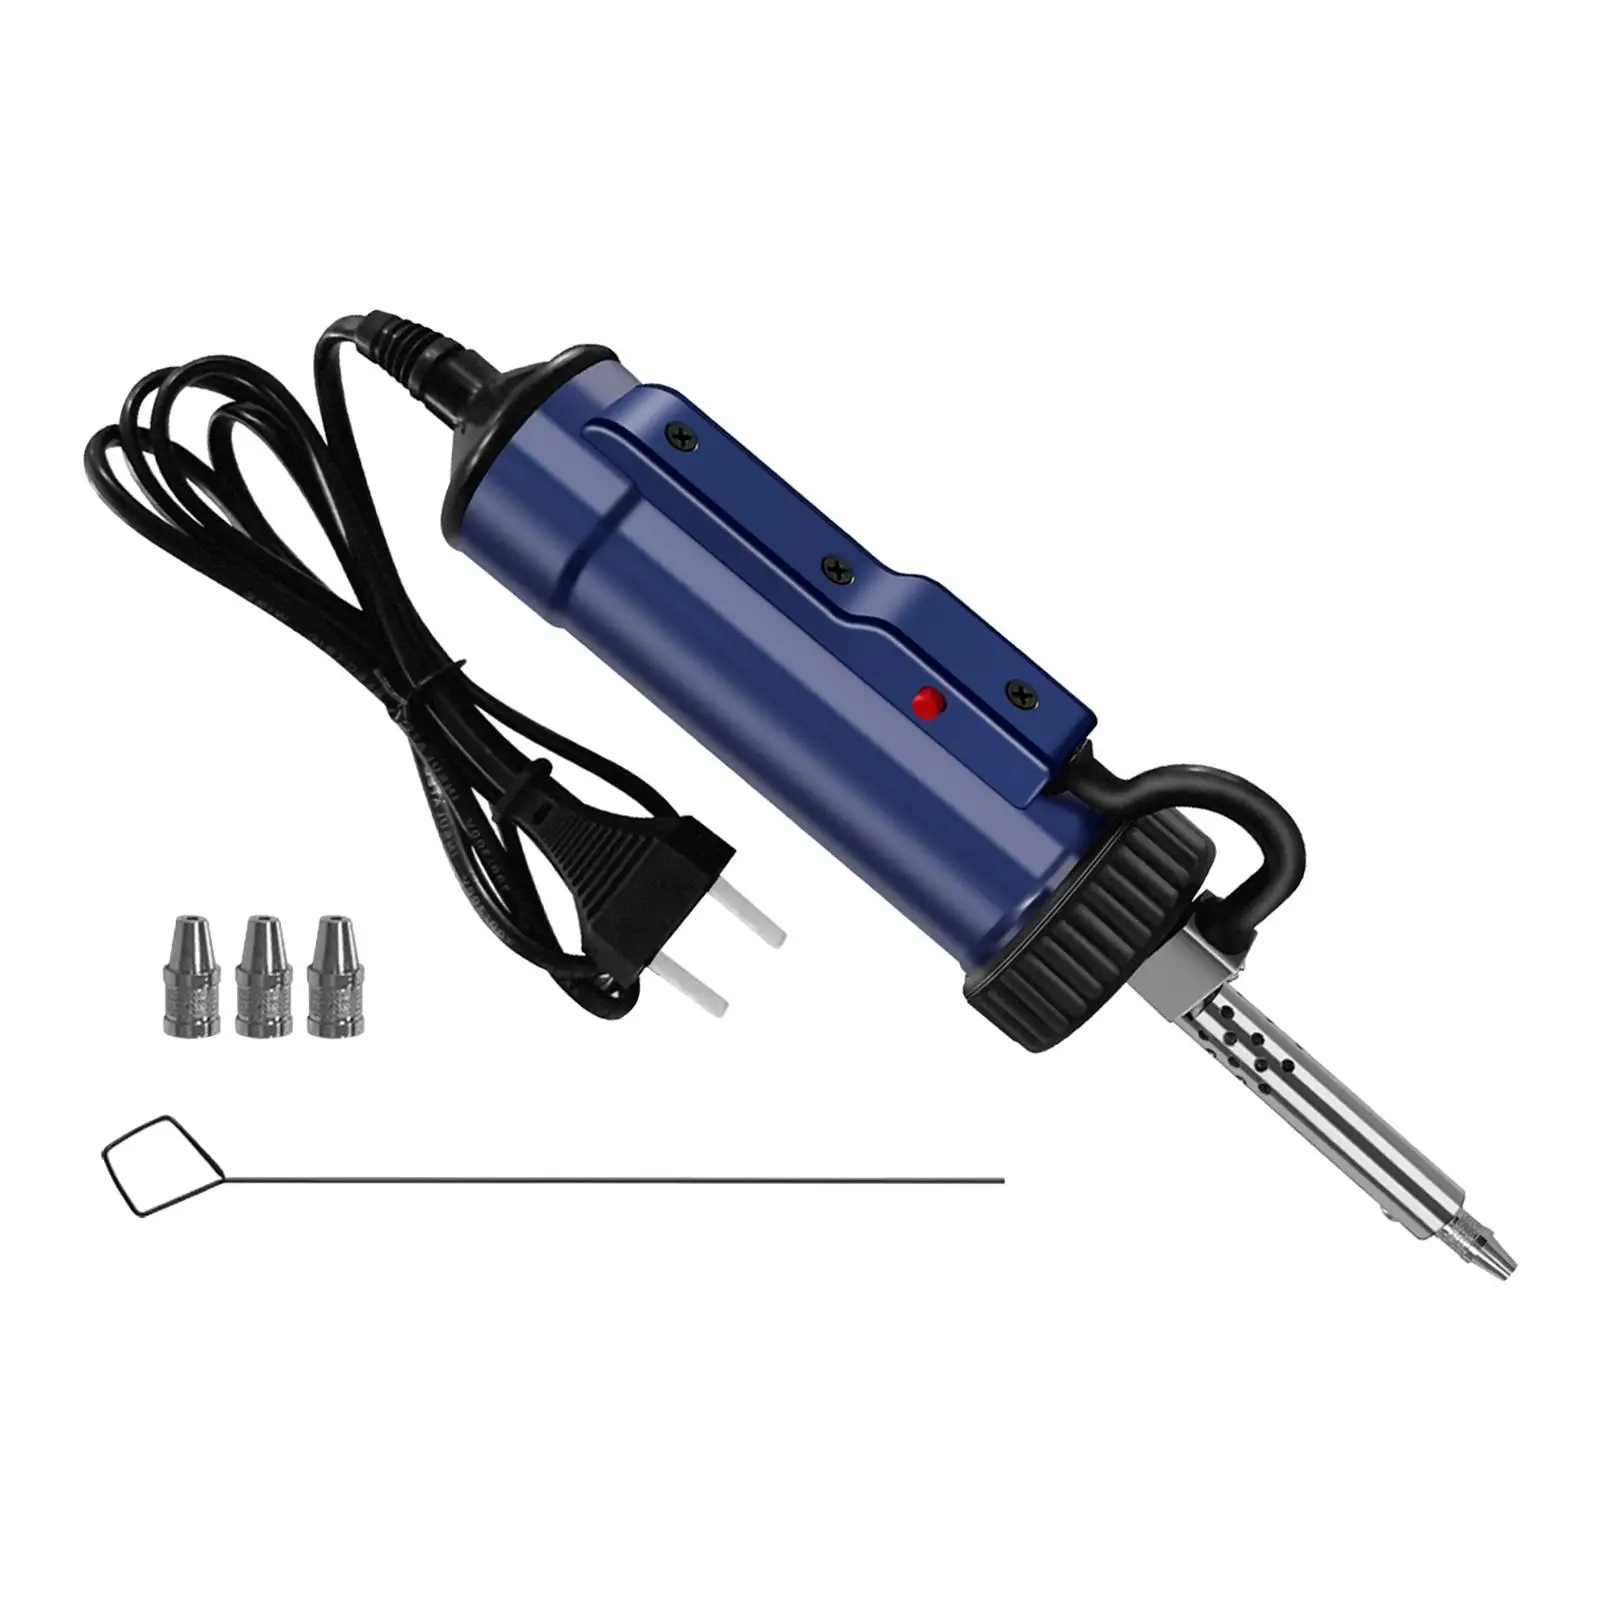 Electric Solder Tin suckers Electric Soldering Handheld Solder Removal Tool Automatic Vacuum Solder suckers for Appliance Repair